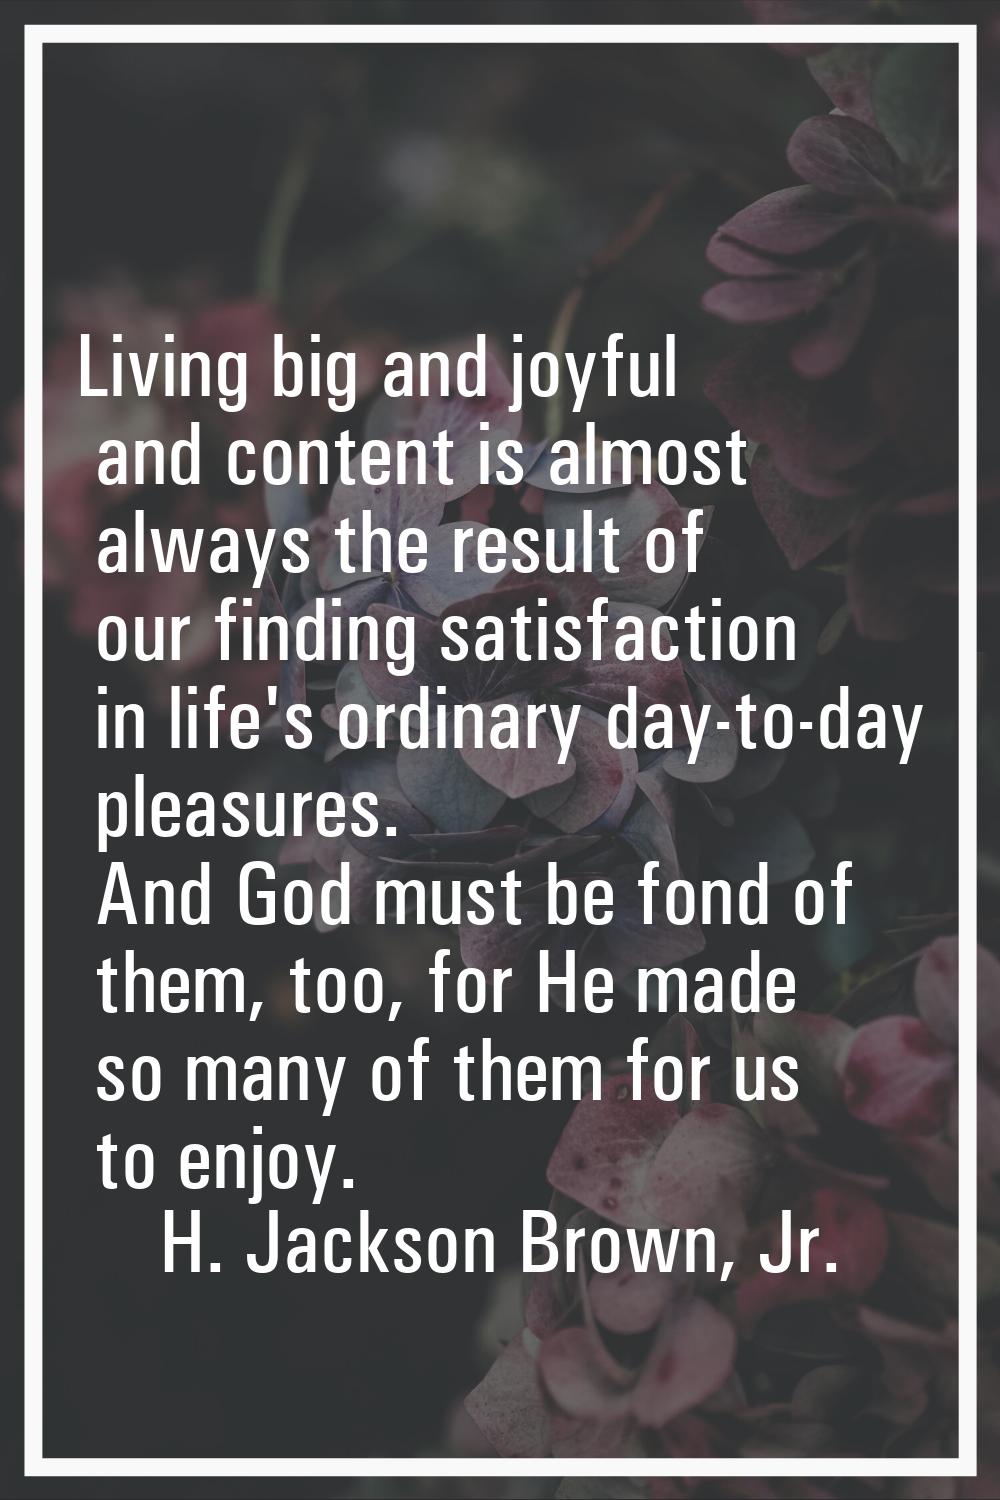 Living big and joyful and content is almost always the result of our finding satisfaction in life's